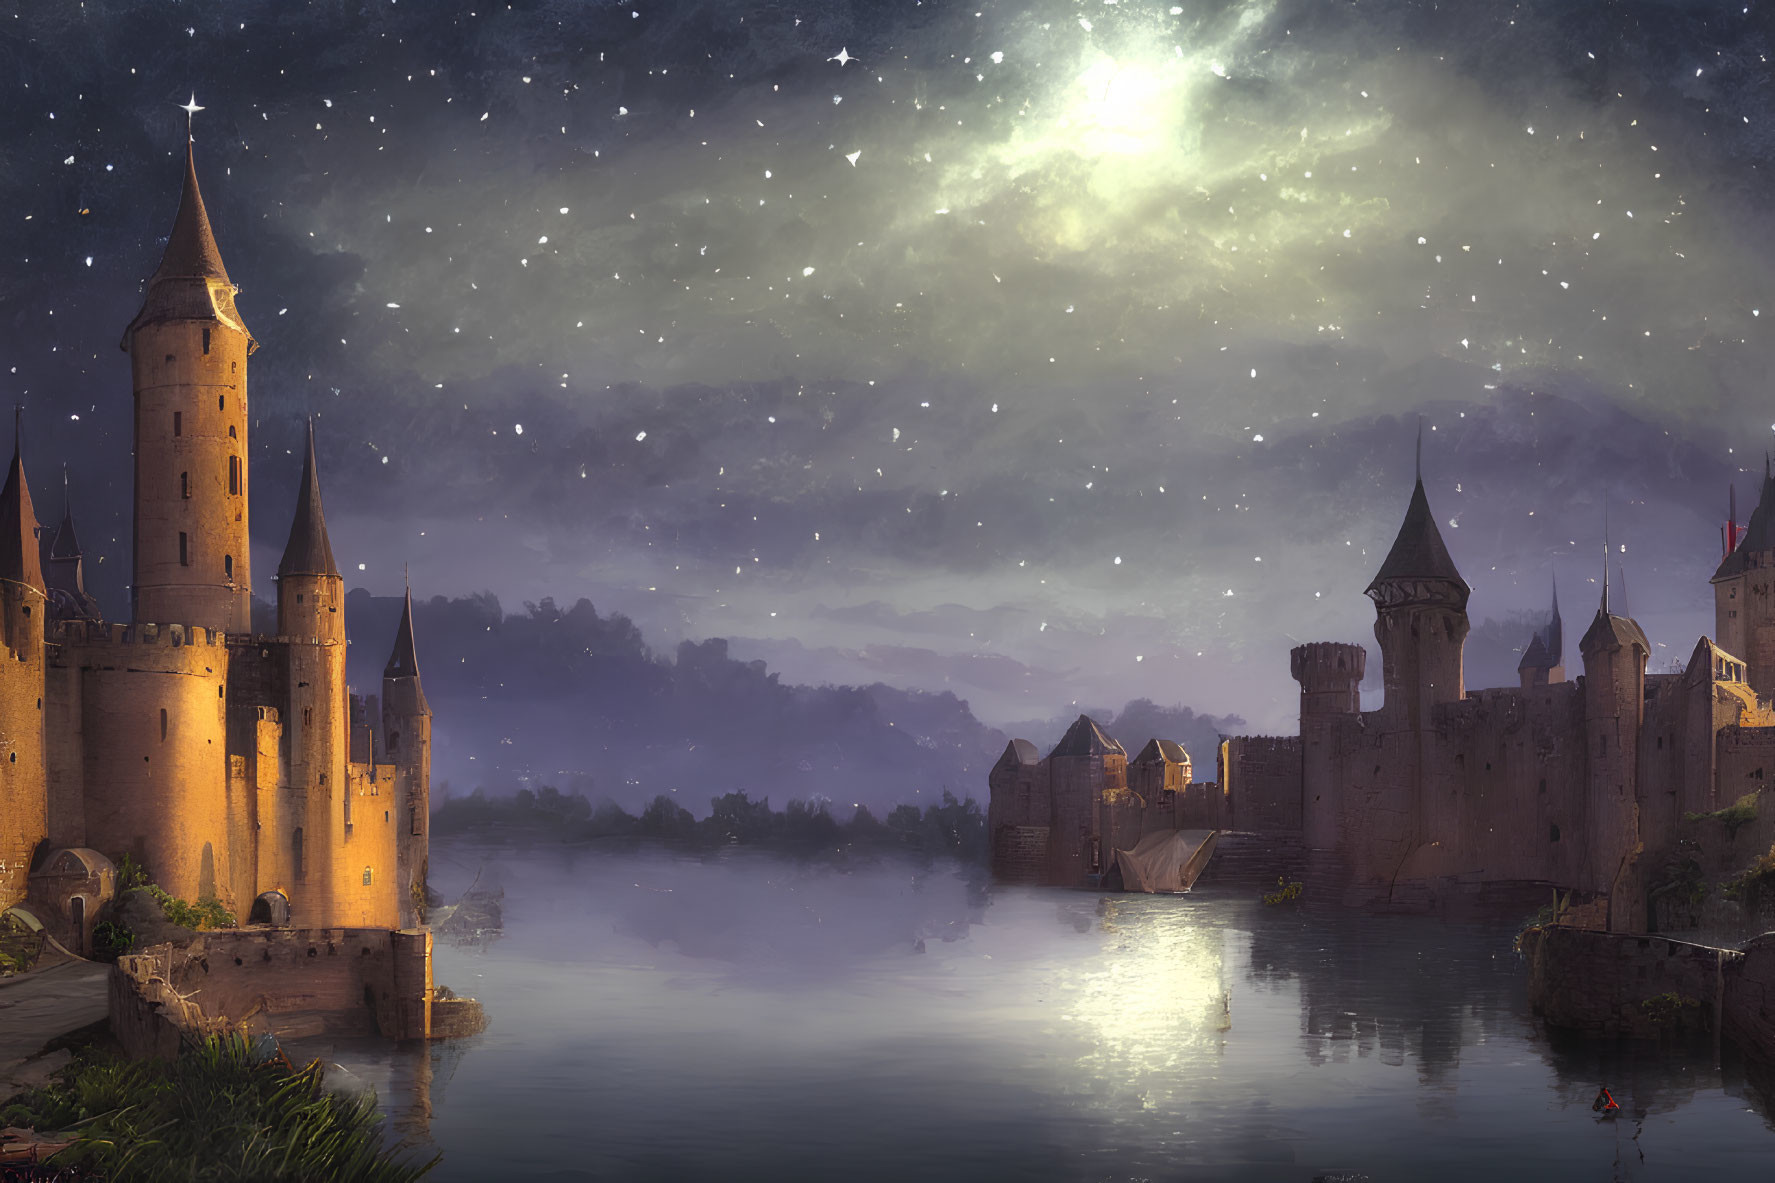 Majestic medieval castle at night by calm river